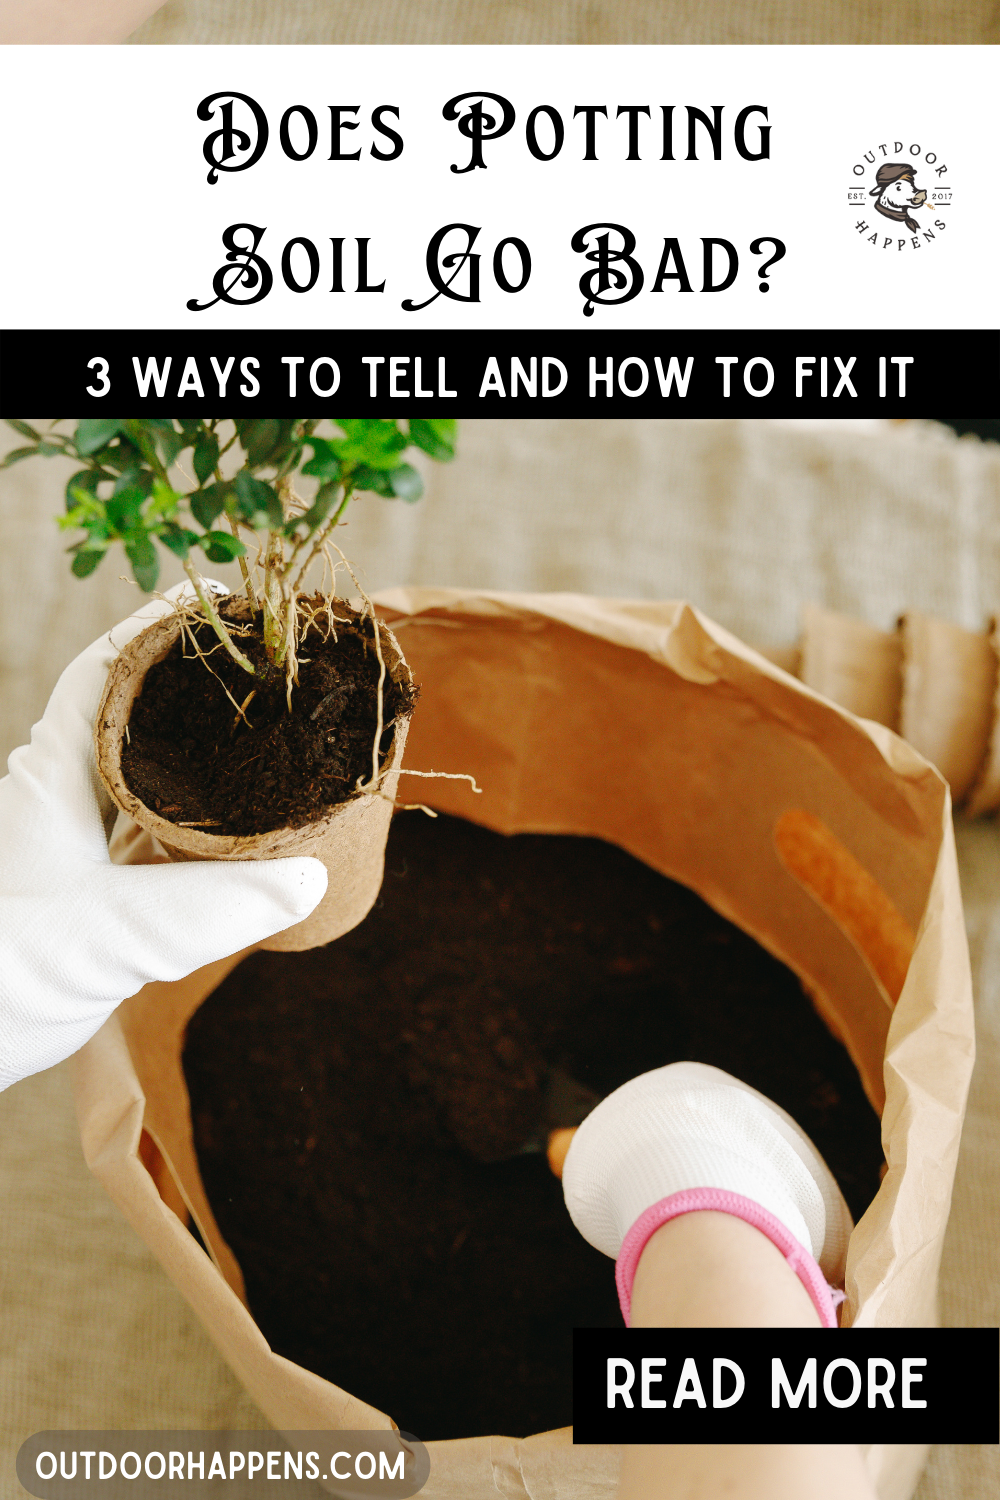 Does Potting Soil Go Bad? 3 Ways To Tell And How To Fix It